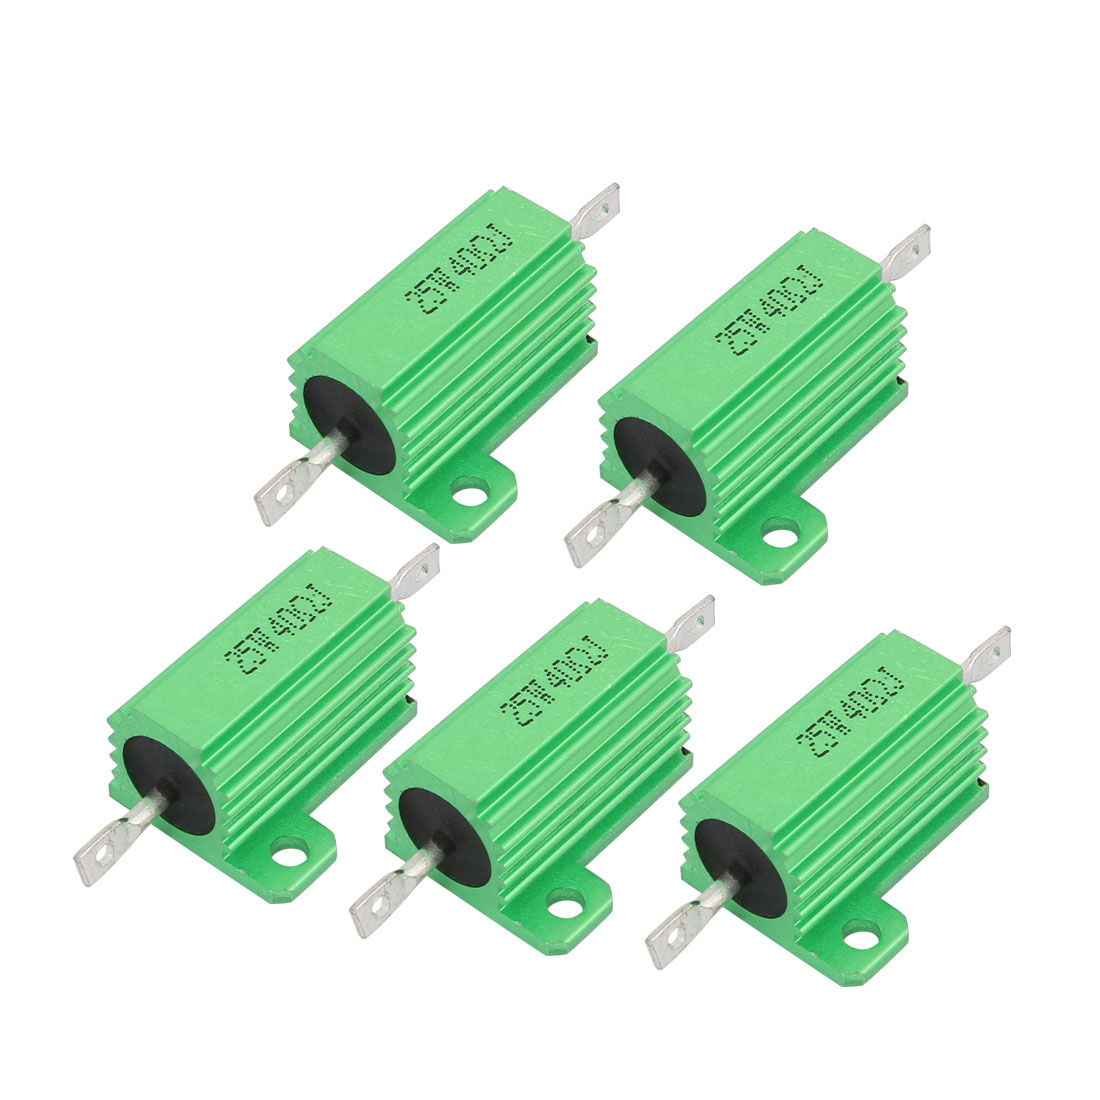 Unique Bargains 5pcs Green 40 Ohm 25W 5% Chassis Mounted Aluminum Clad Wirewound Resistor